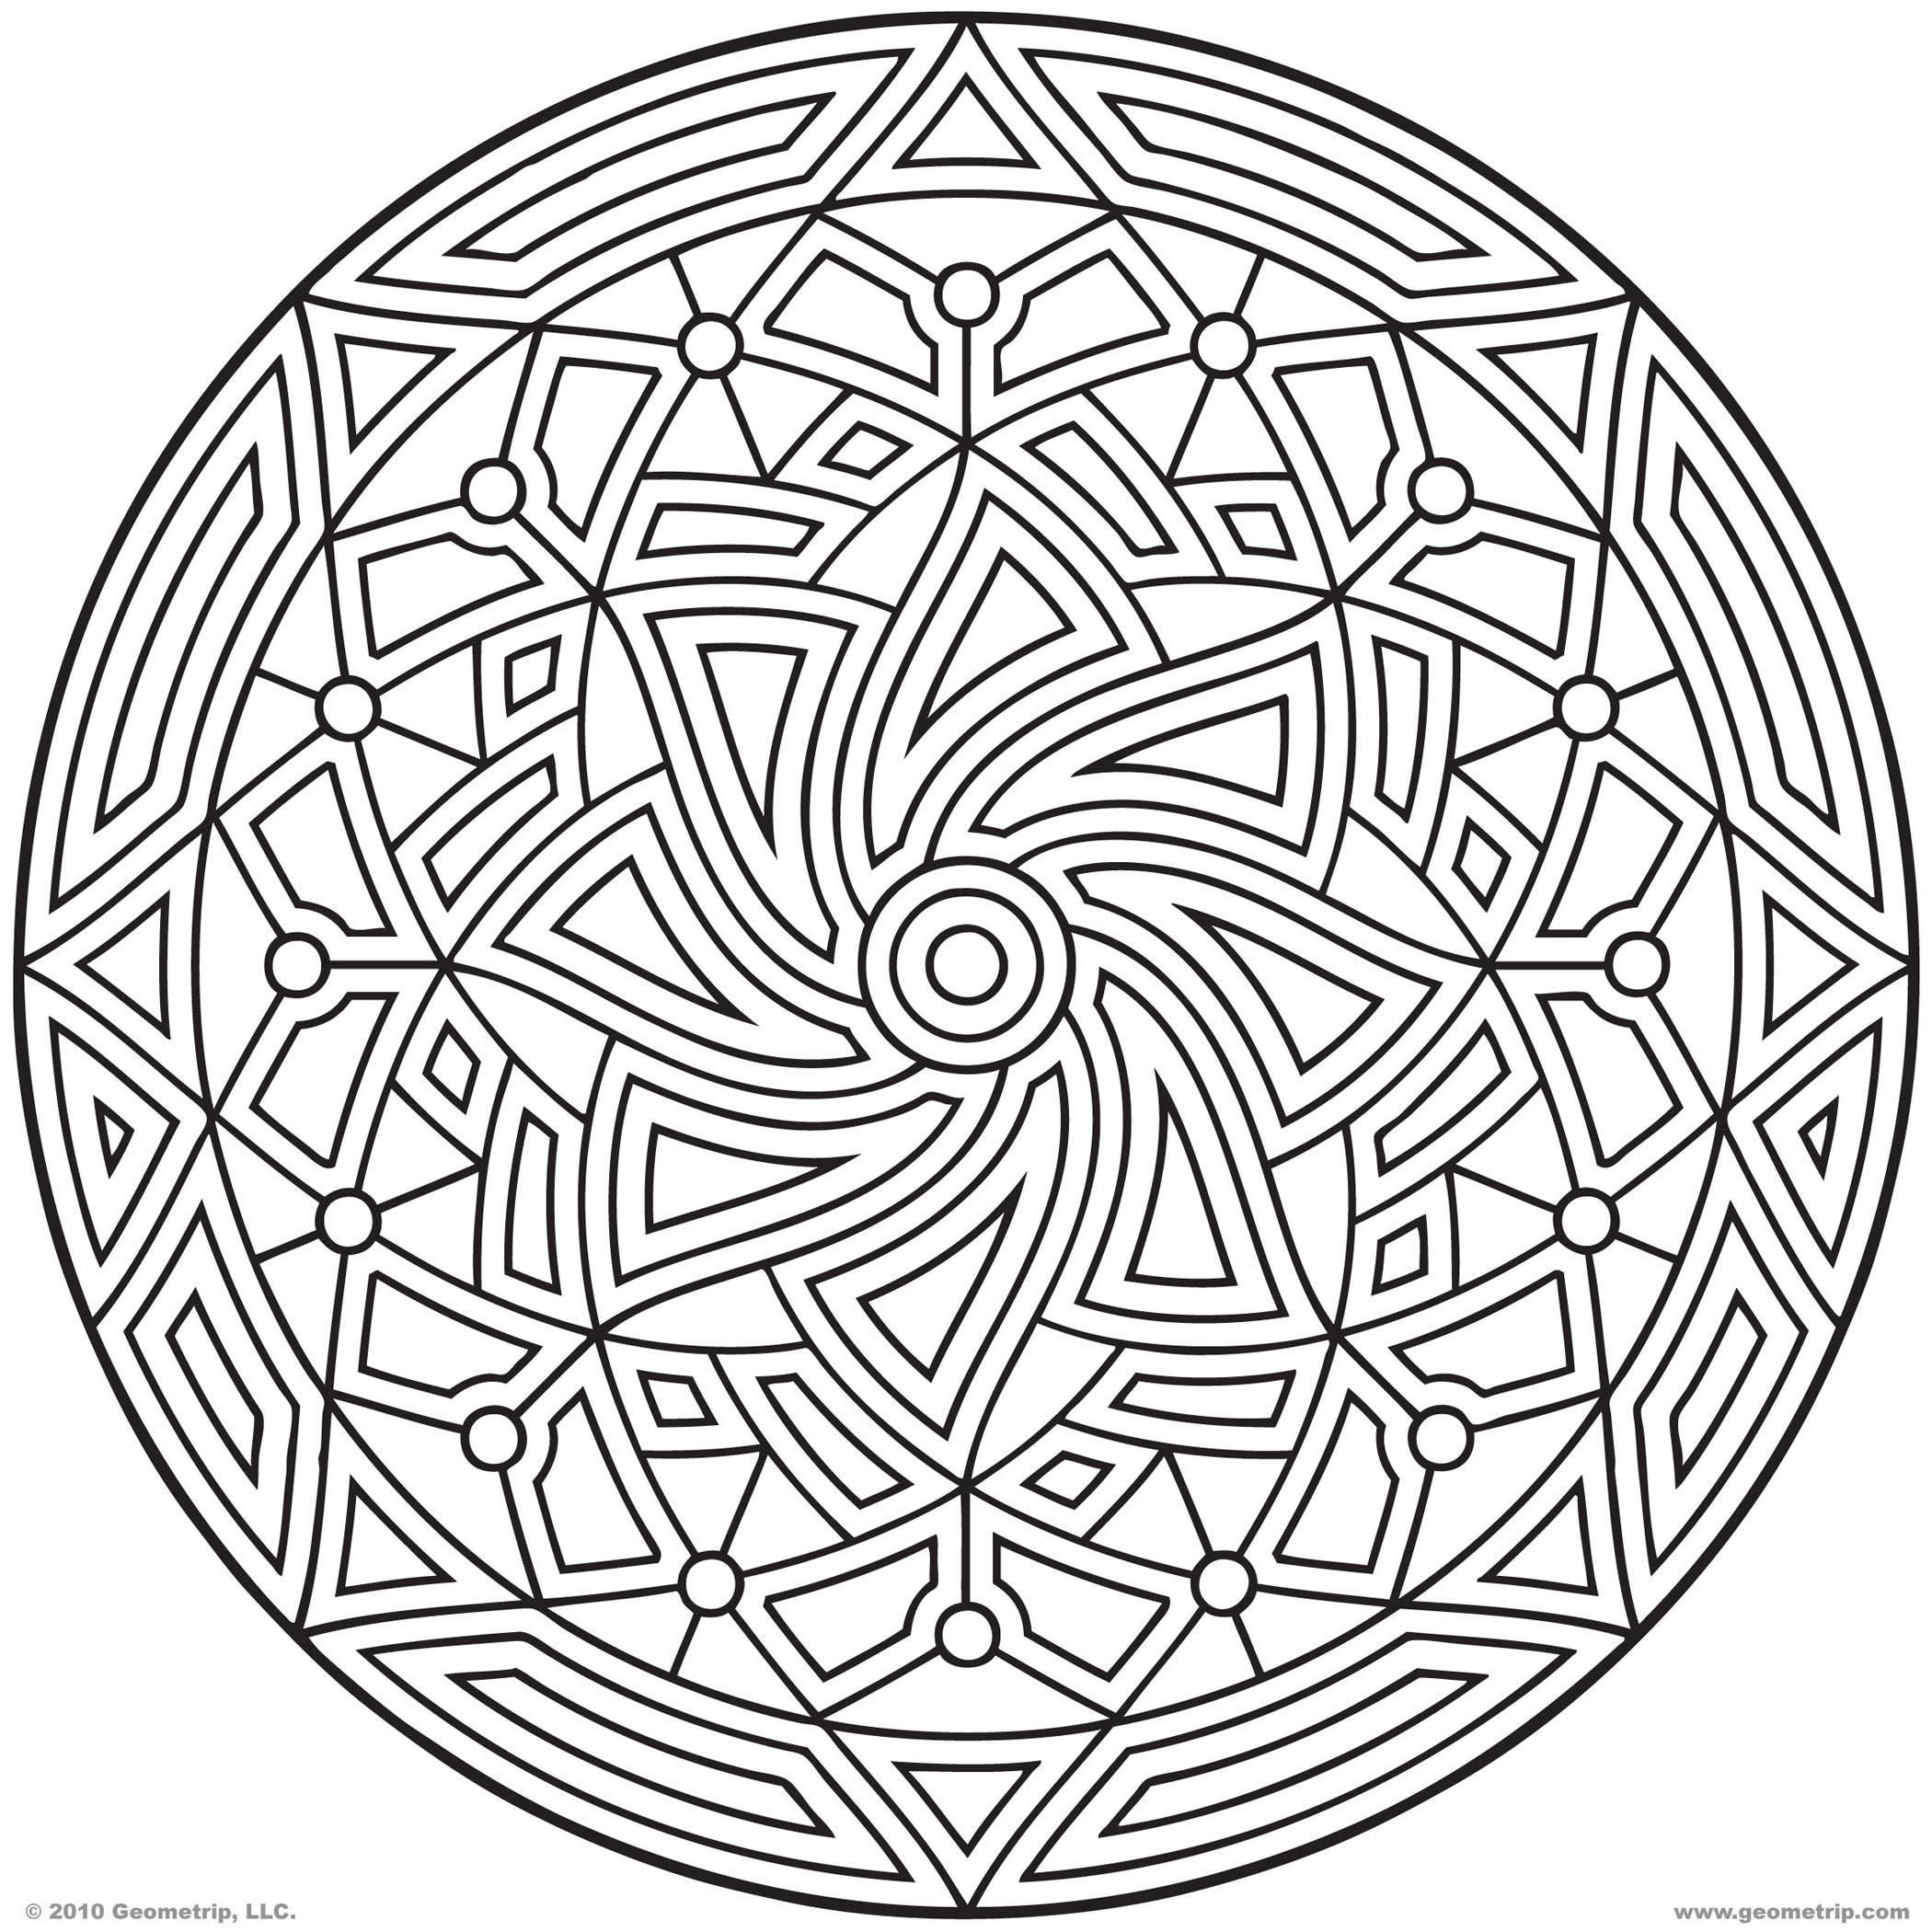 Geometric Design Coloring Pages - Max Coloring